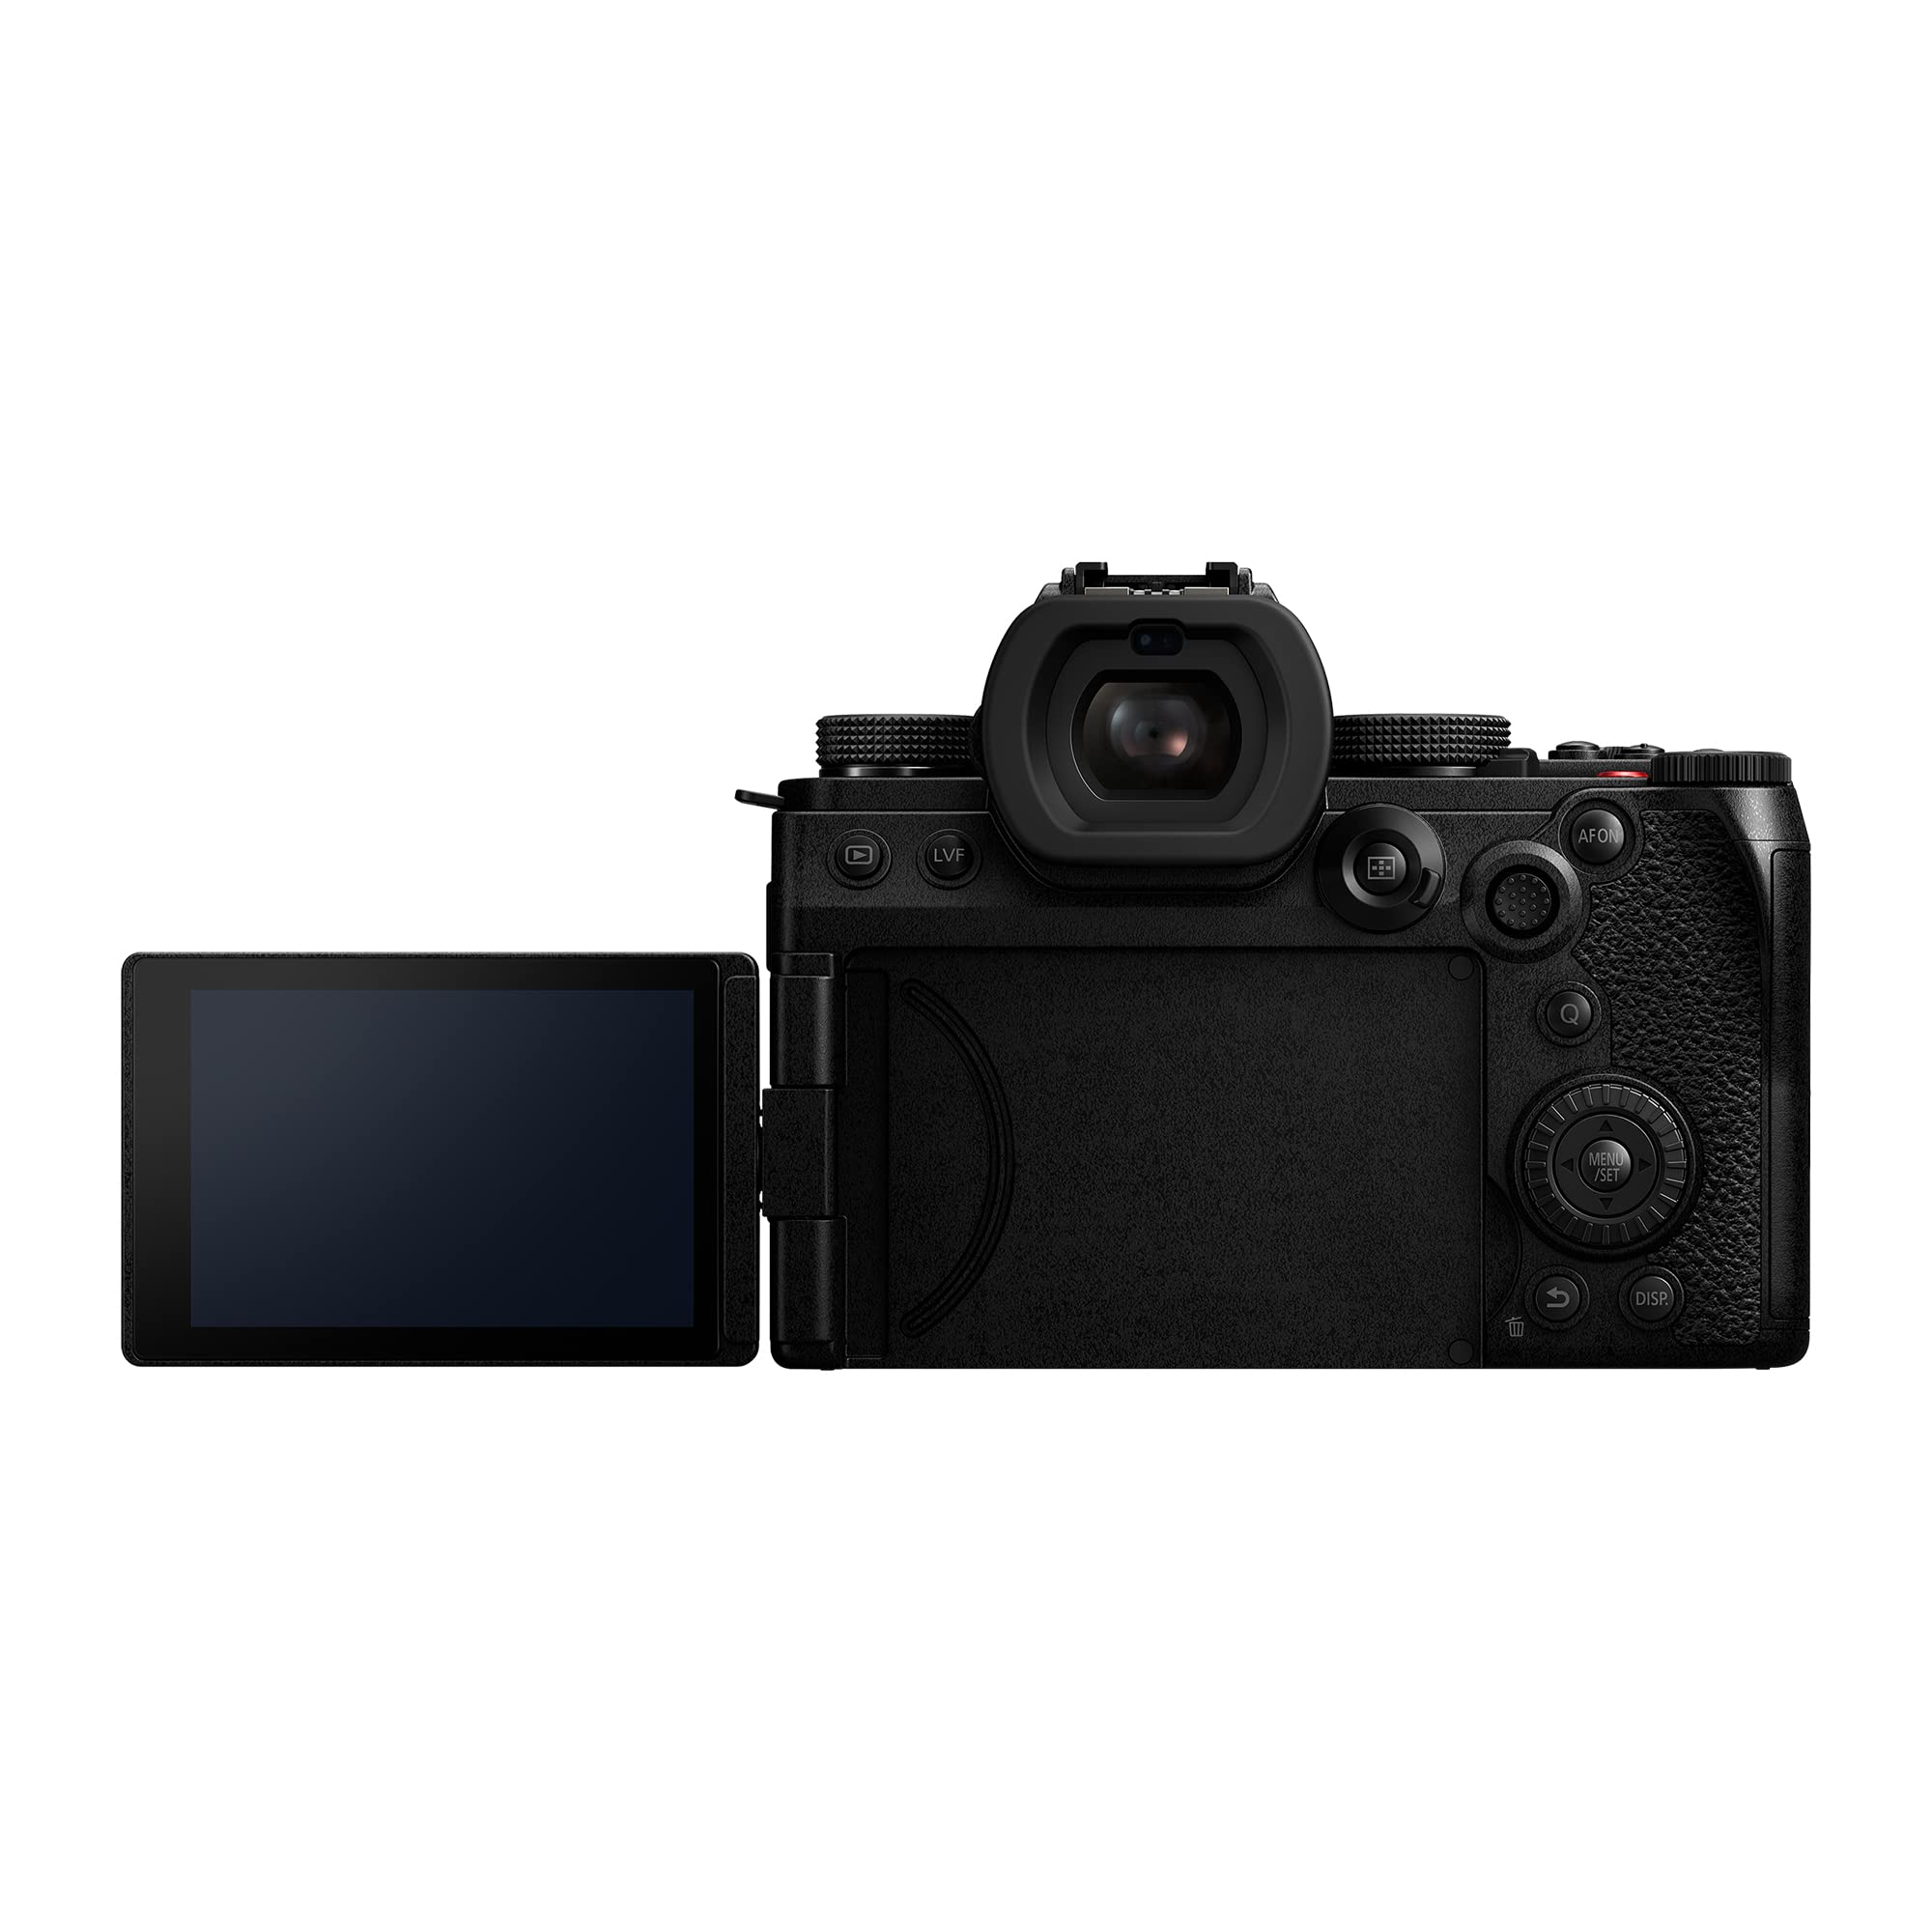 Panasonic LUMIX S5IIX Mirrorless Camera, 24.2MP Full Frame with Phase Hybrid AF, Unlimited 4:2:2 10-bit Recording, 5.8K Pro-Res, RAW Over HDMI, IP Streaming with 20-60mm F3.5-5.6 Lens - DC-S5M2XKK